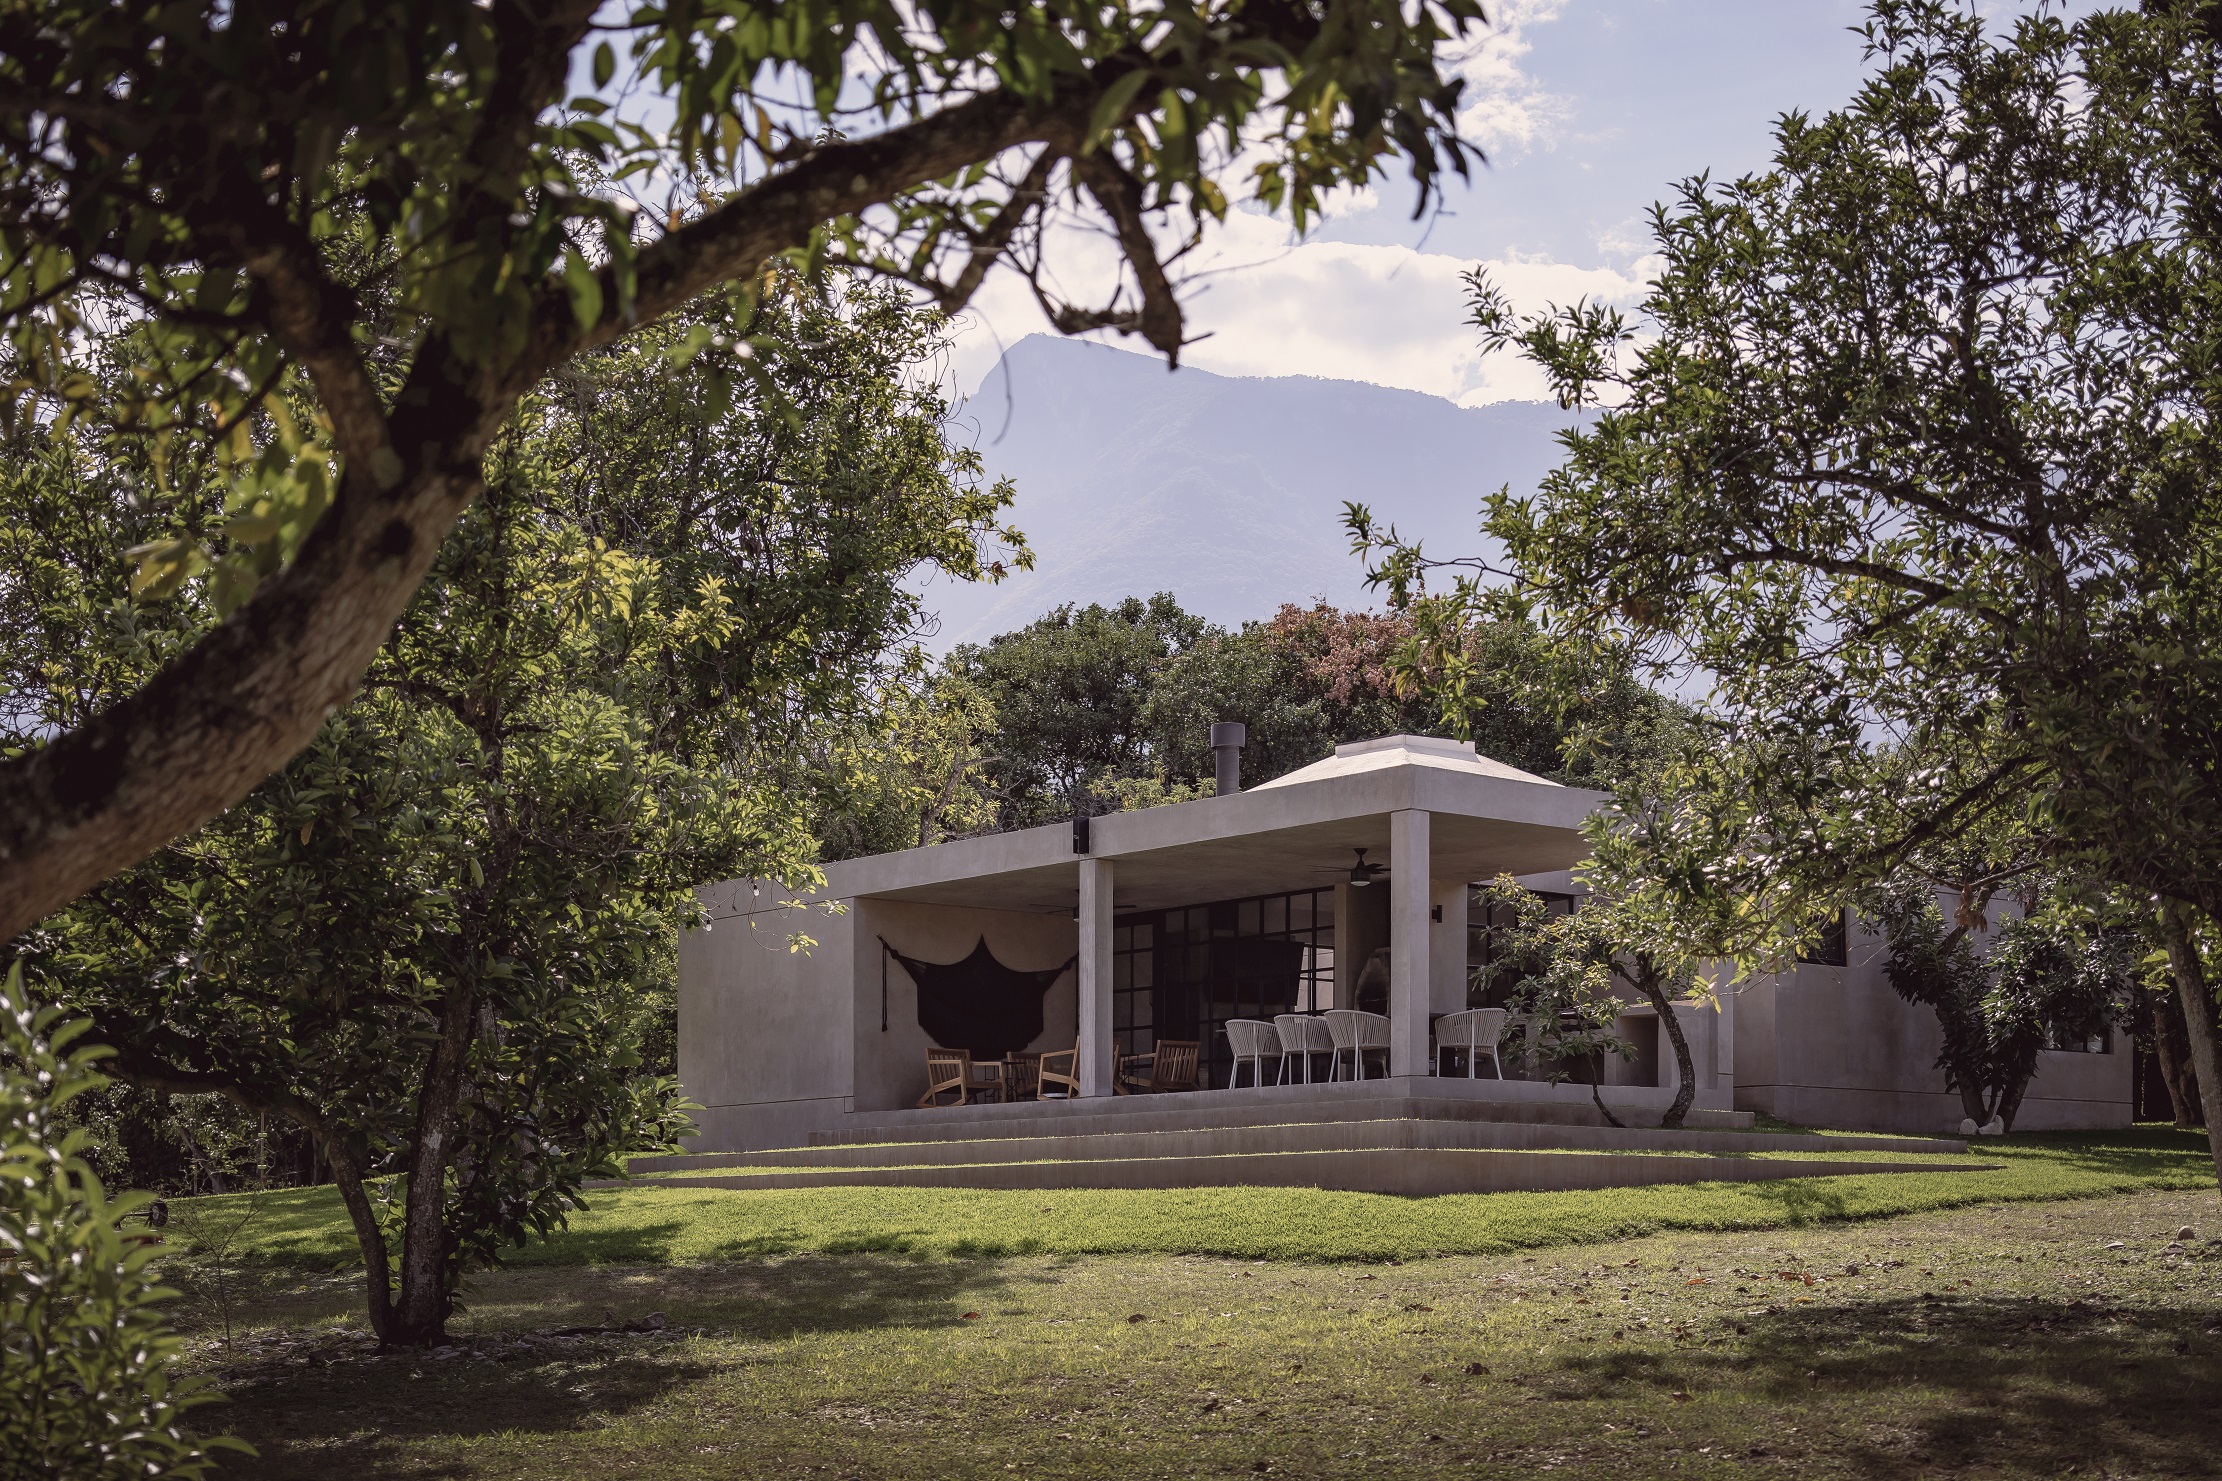 El Aguacate: A Weekend Retreat Surrounded by Nature